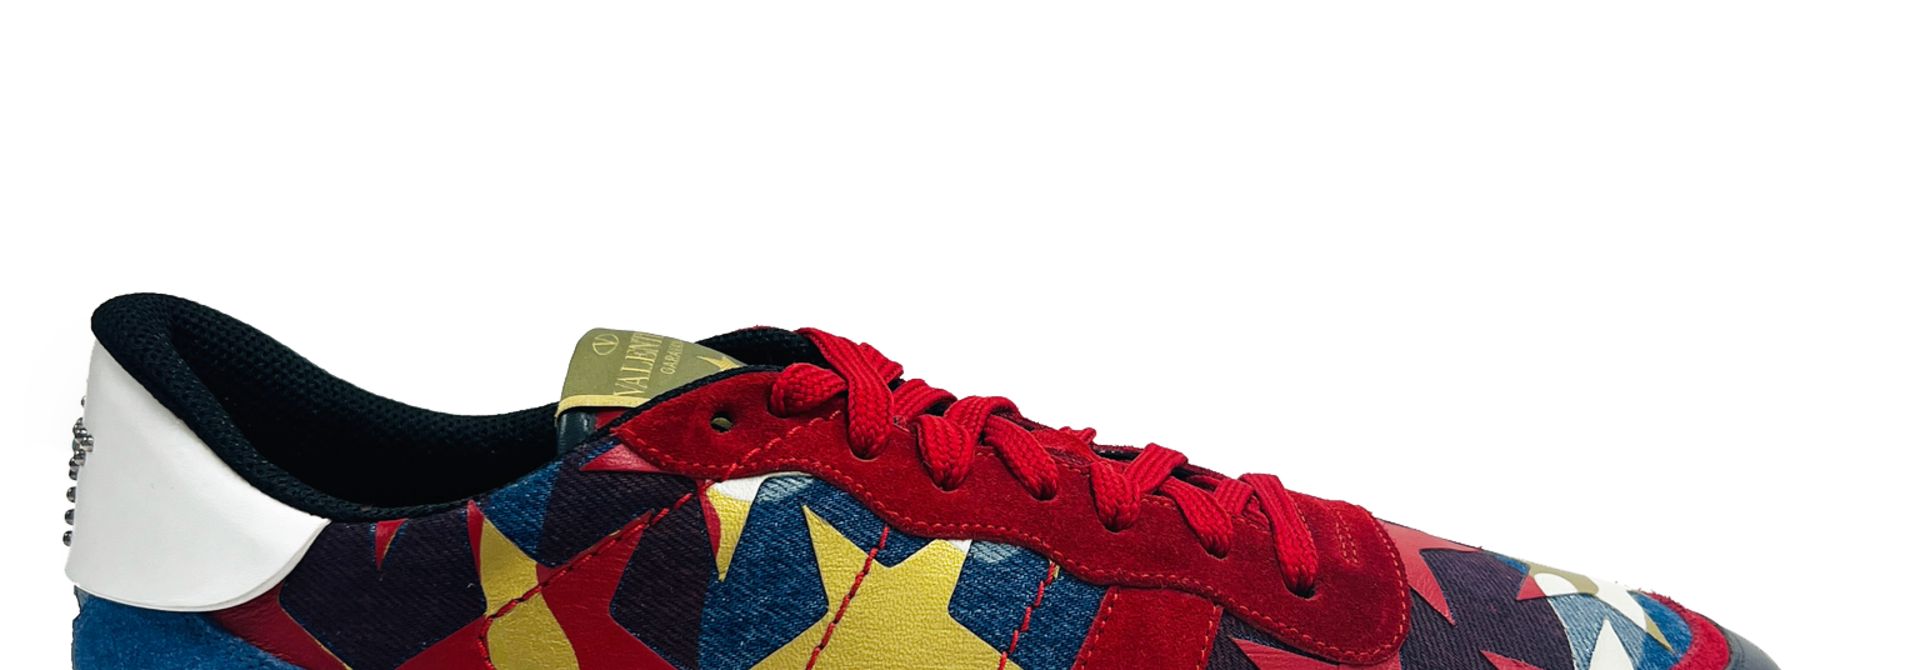 CA VALENTINO ROCKRUNNER STAR-STUDDED LEATHER SNEAKER RED/ WHITE/ BLUE CAMO STAR TRAINER